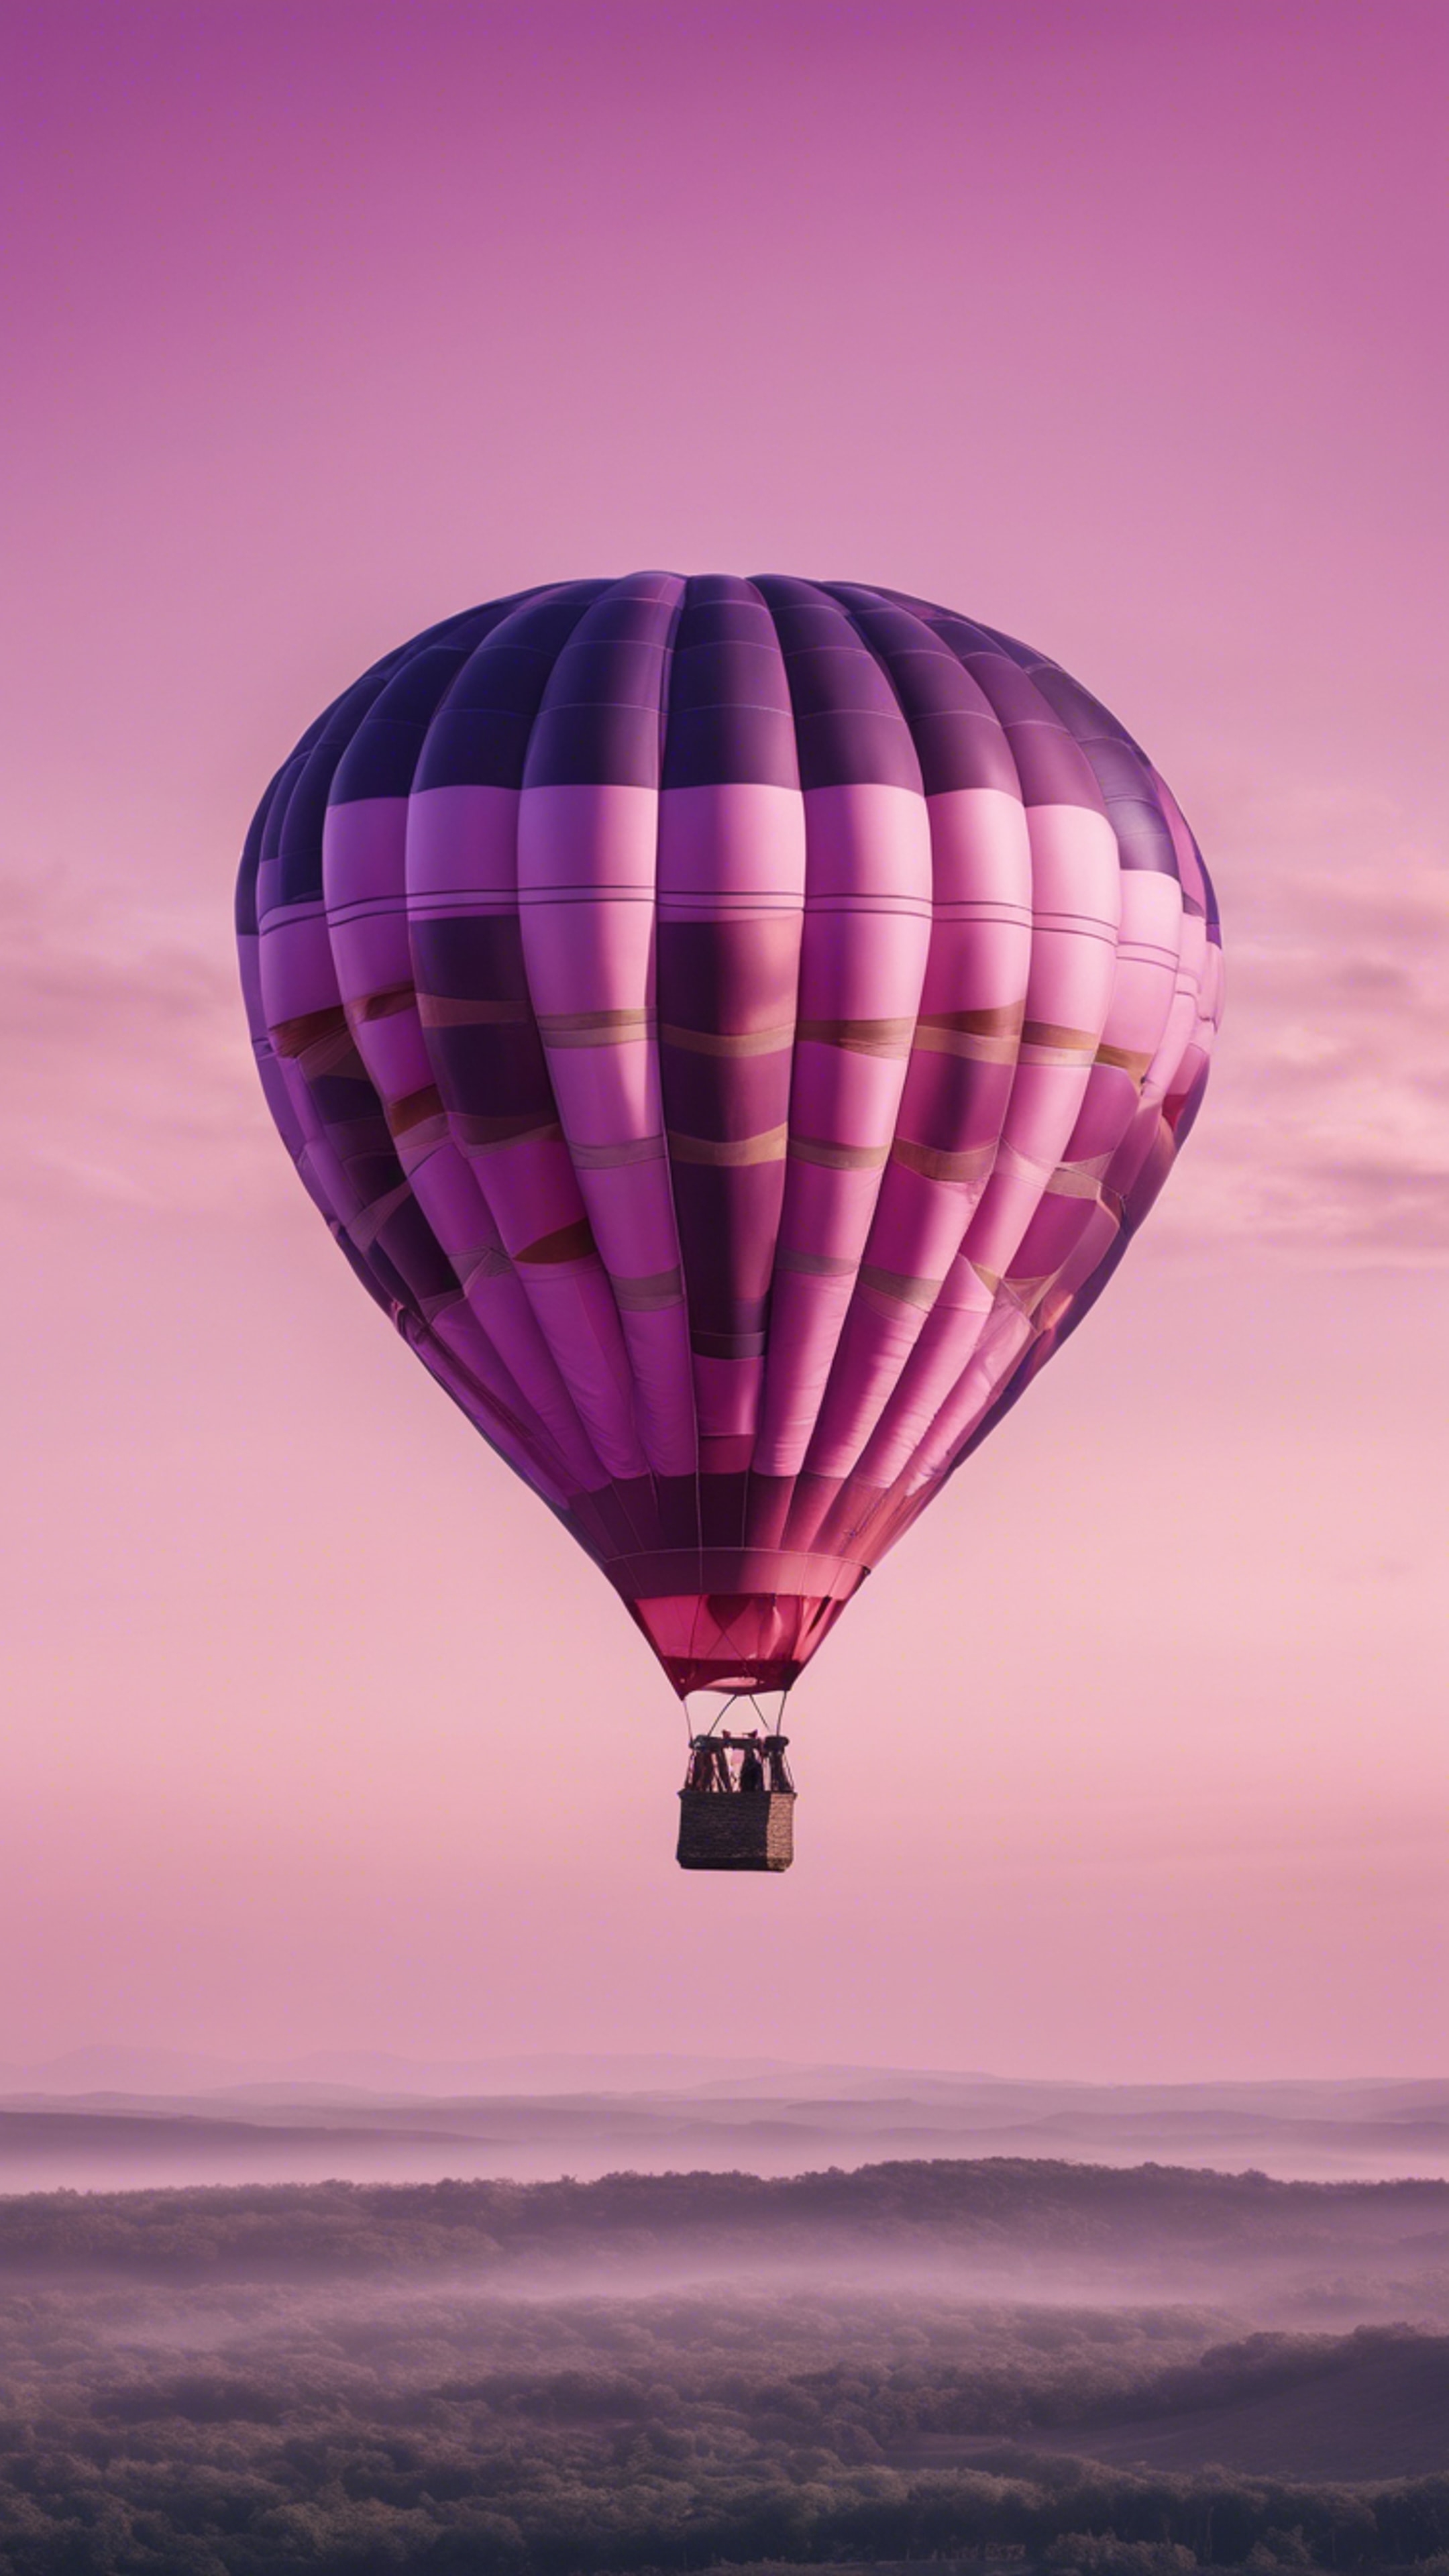 A pink and purple striped hot air balloon floating in a clear morning sky.壁紙[24bb758d911f4cfb8c8f]